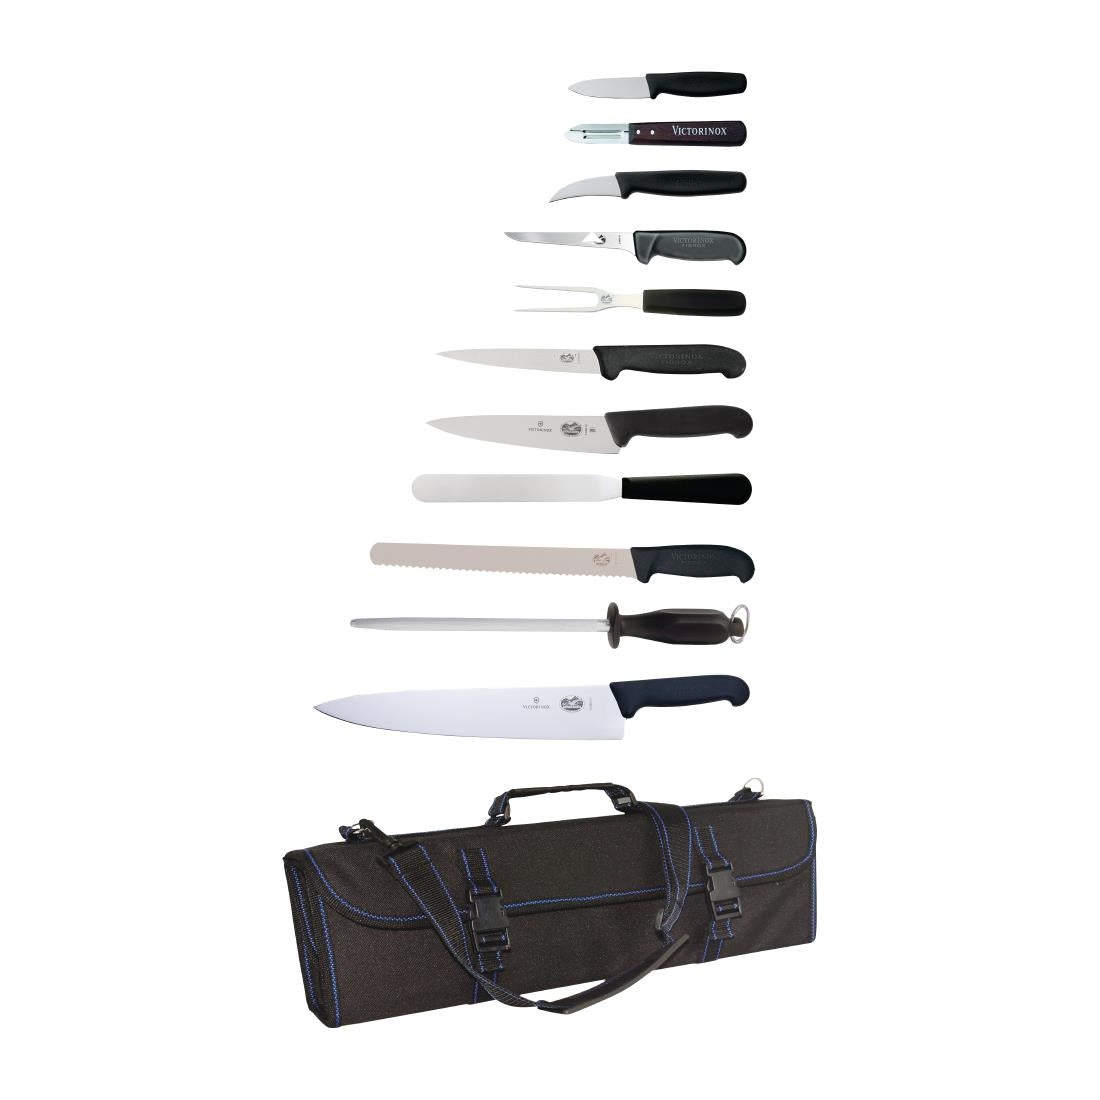 S853 Victorinox 11 Piece Knife Set with Wallet